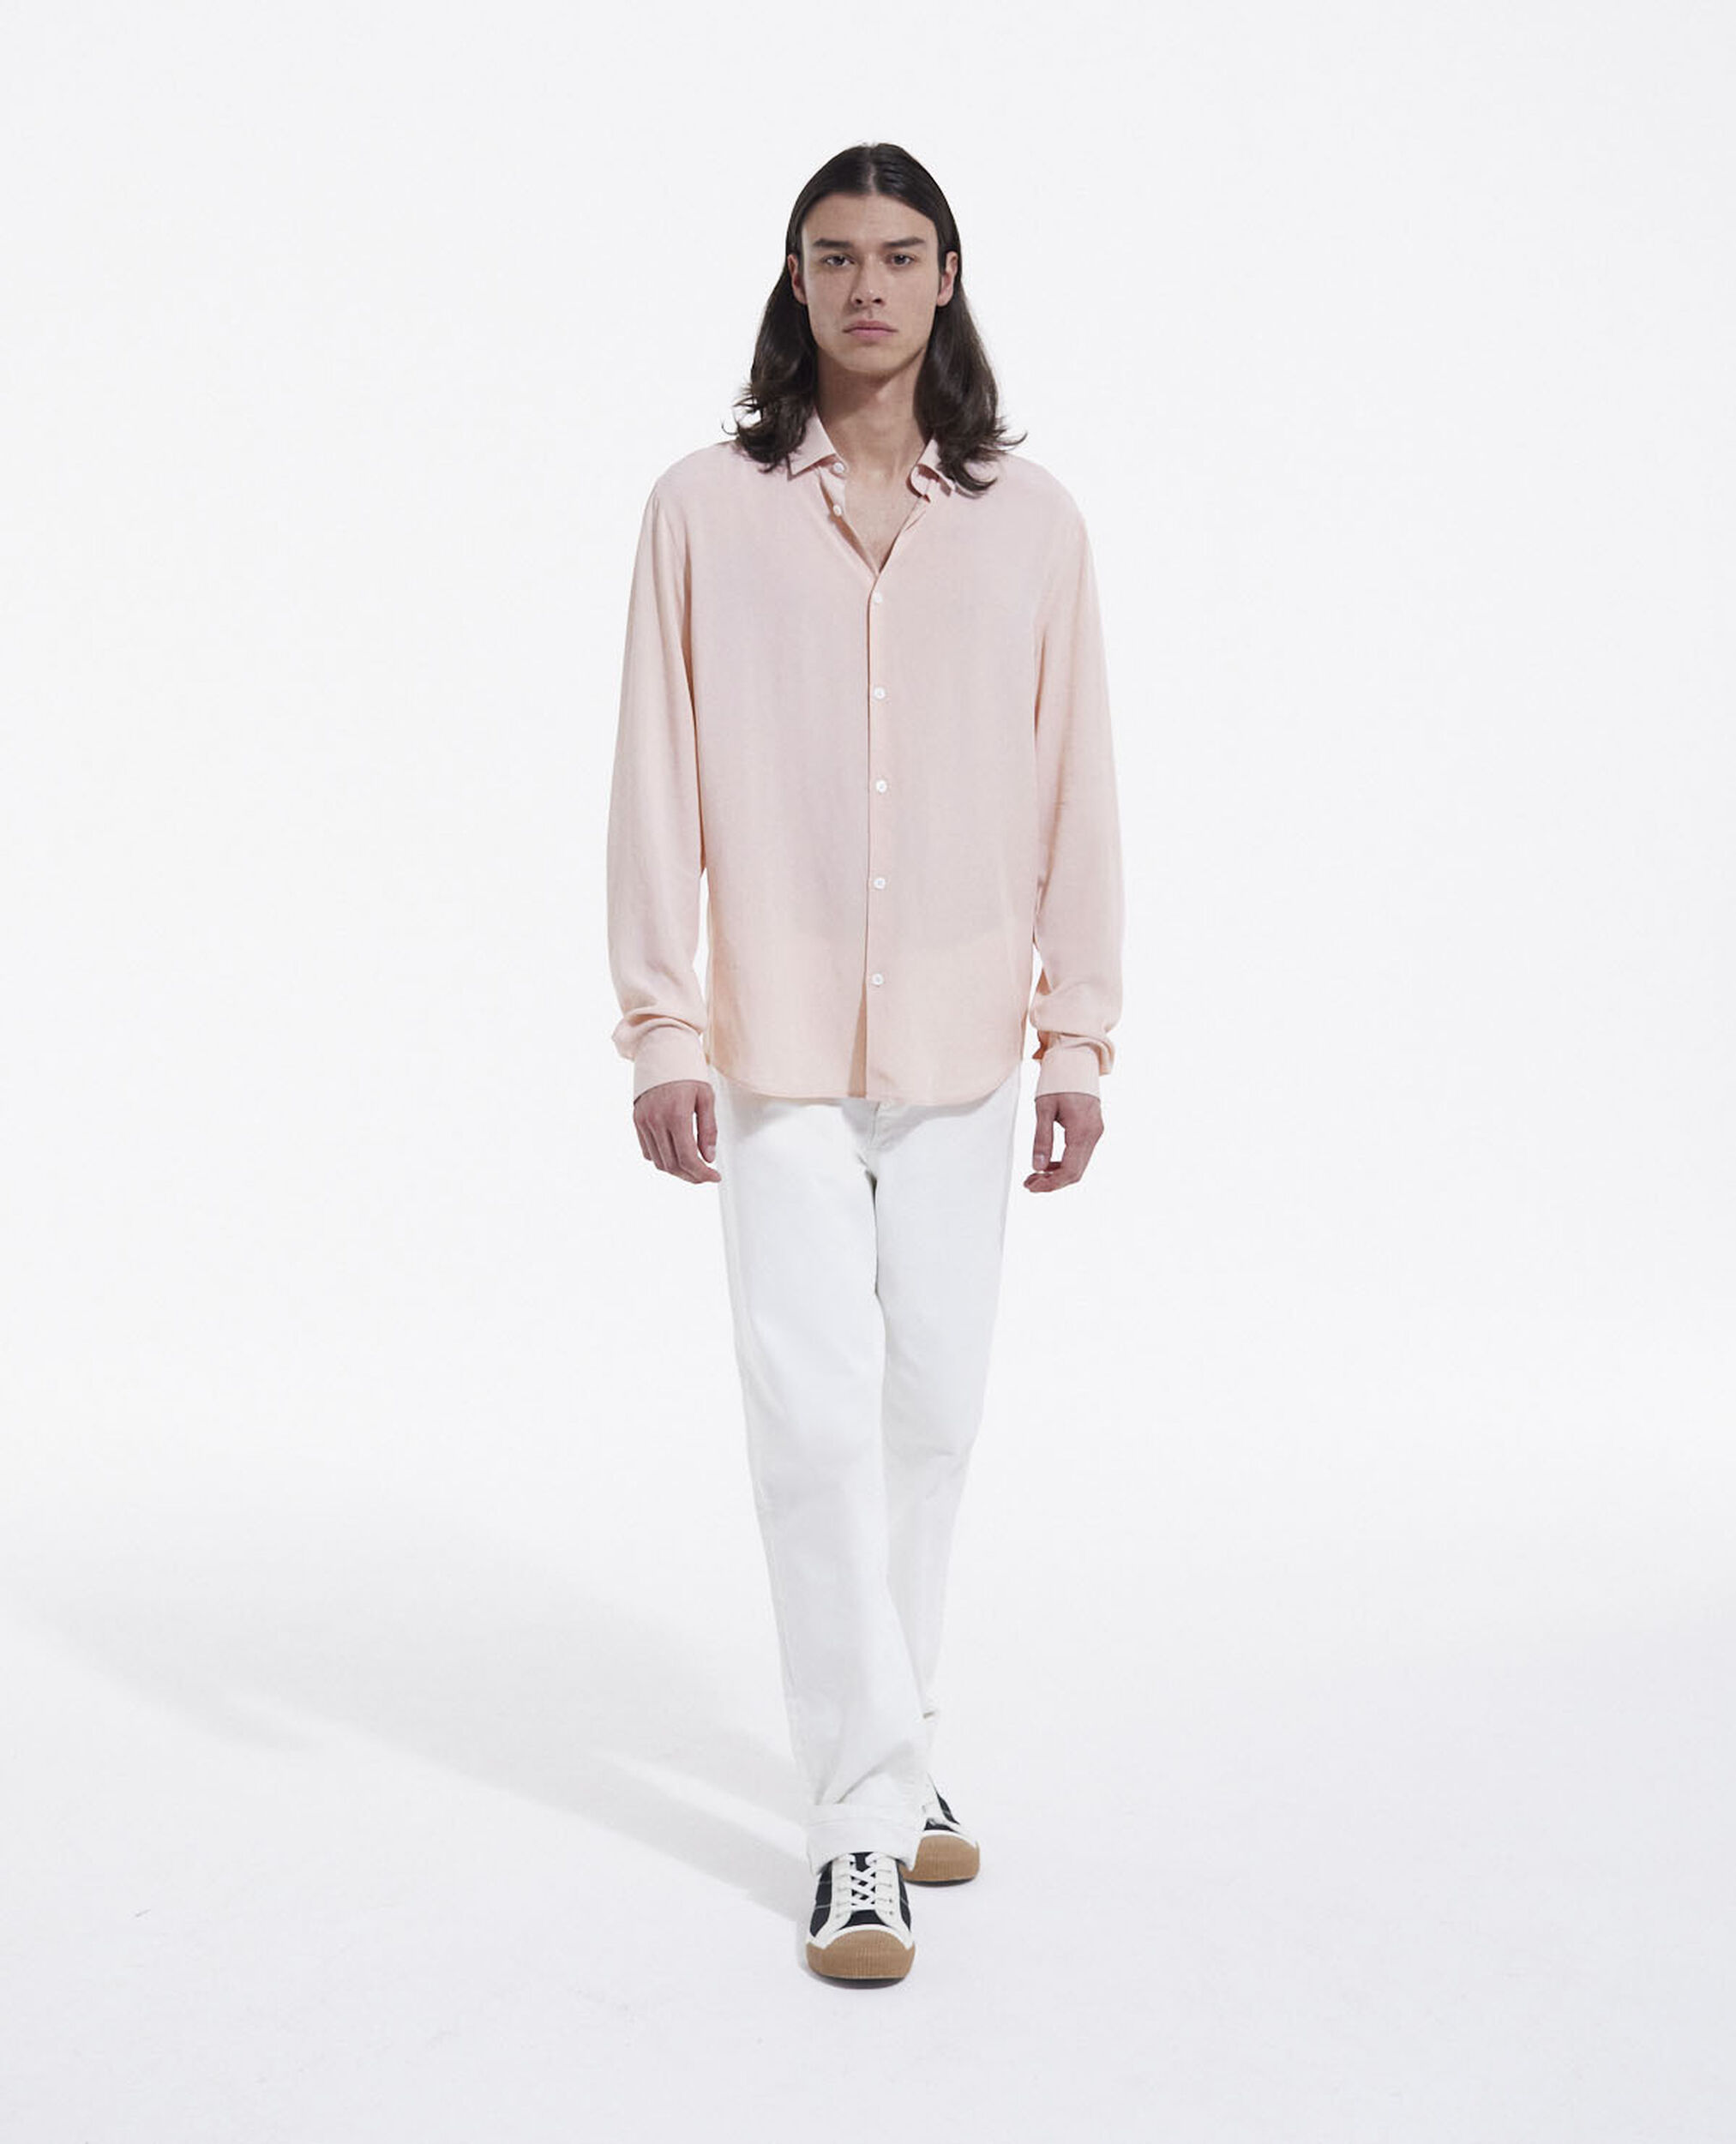 Flowing light pink shirt with Cuban collar, PINK, hi-res image number null